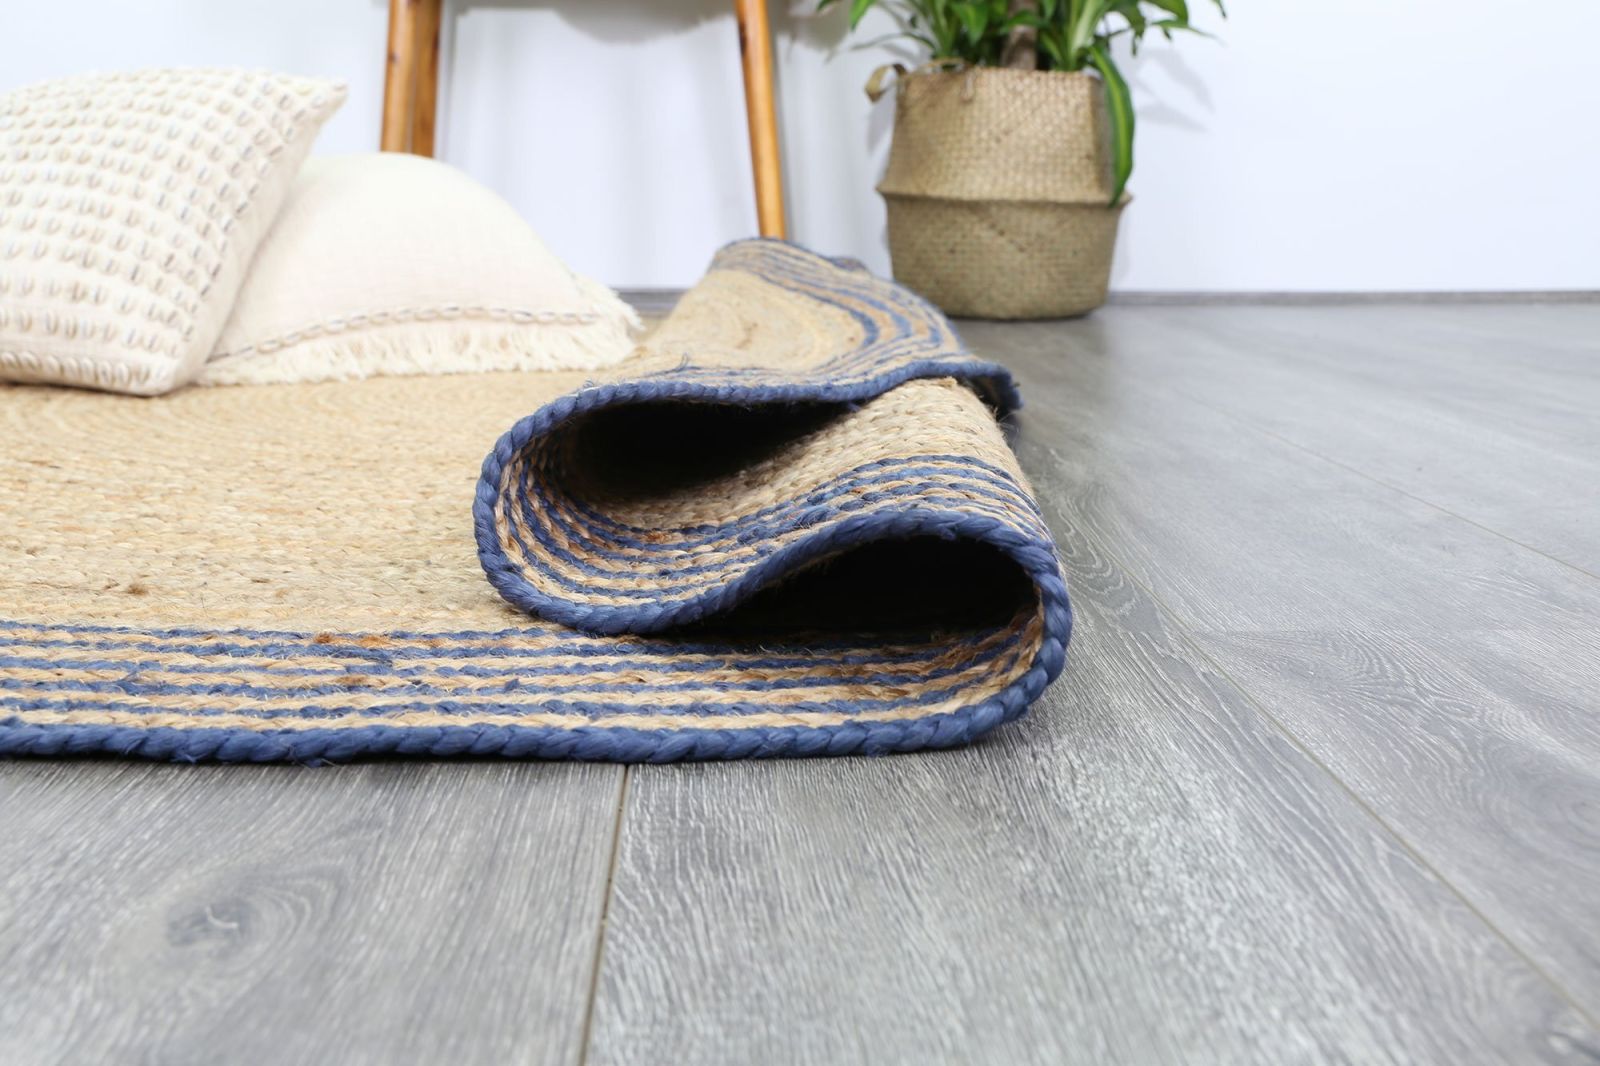 jute rug rolled up at edges